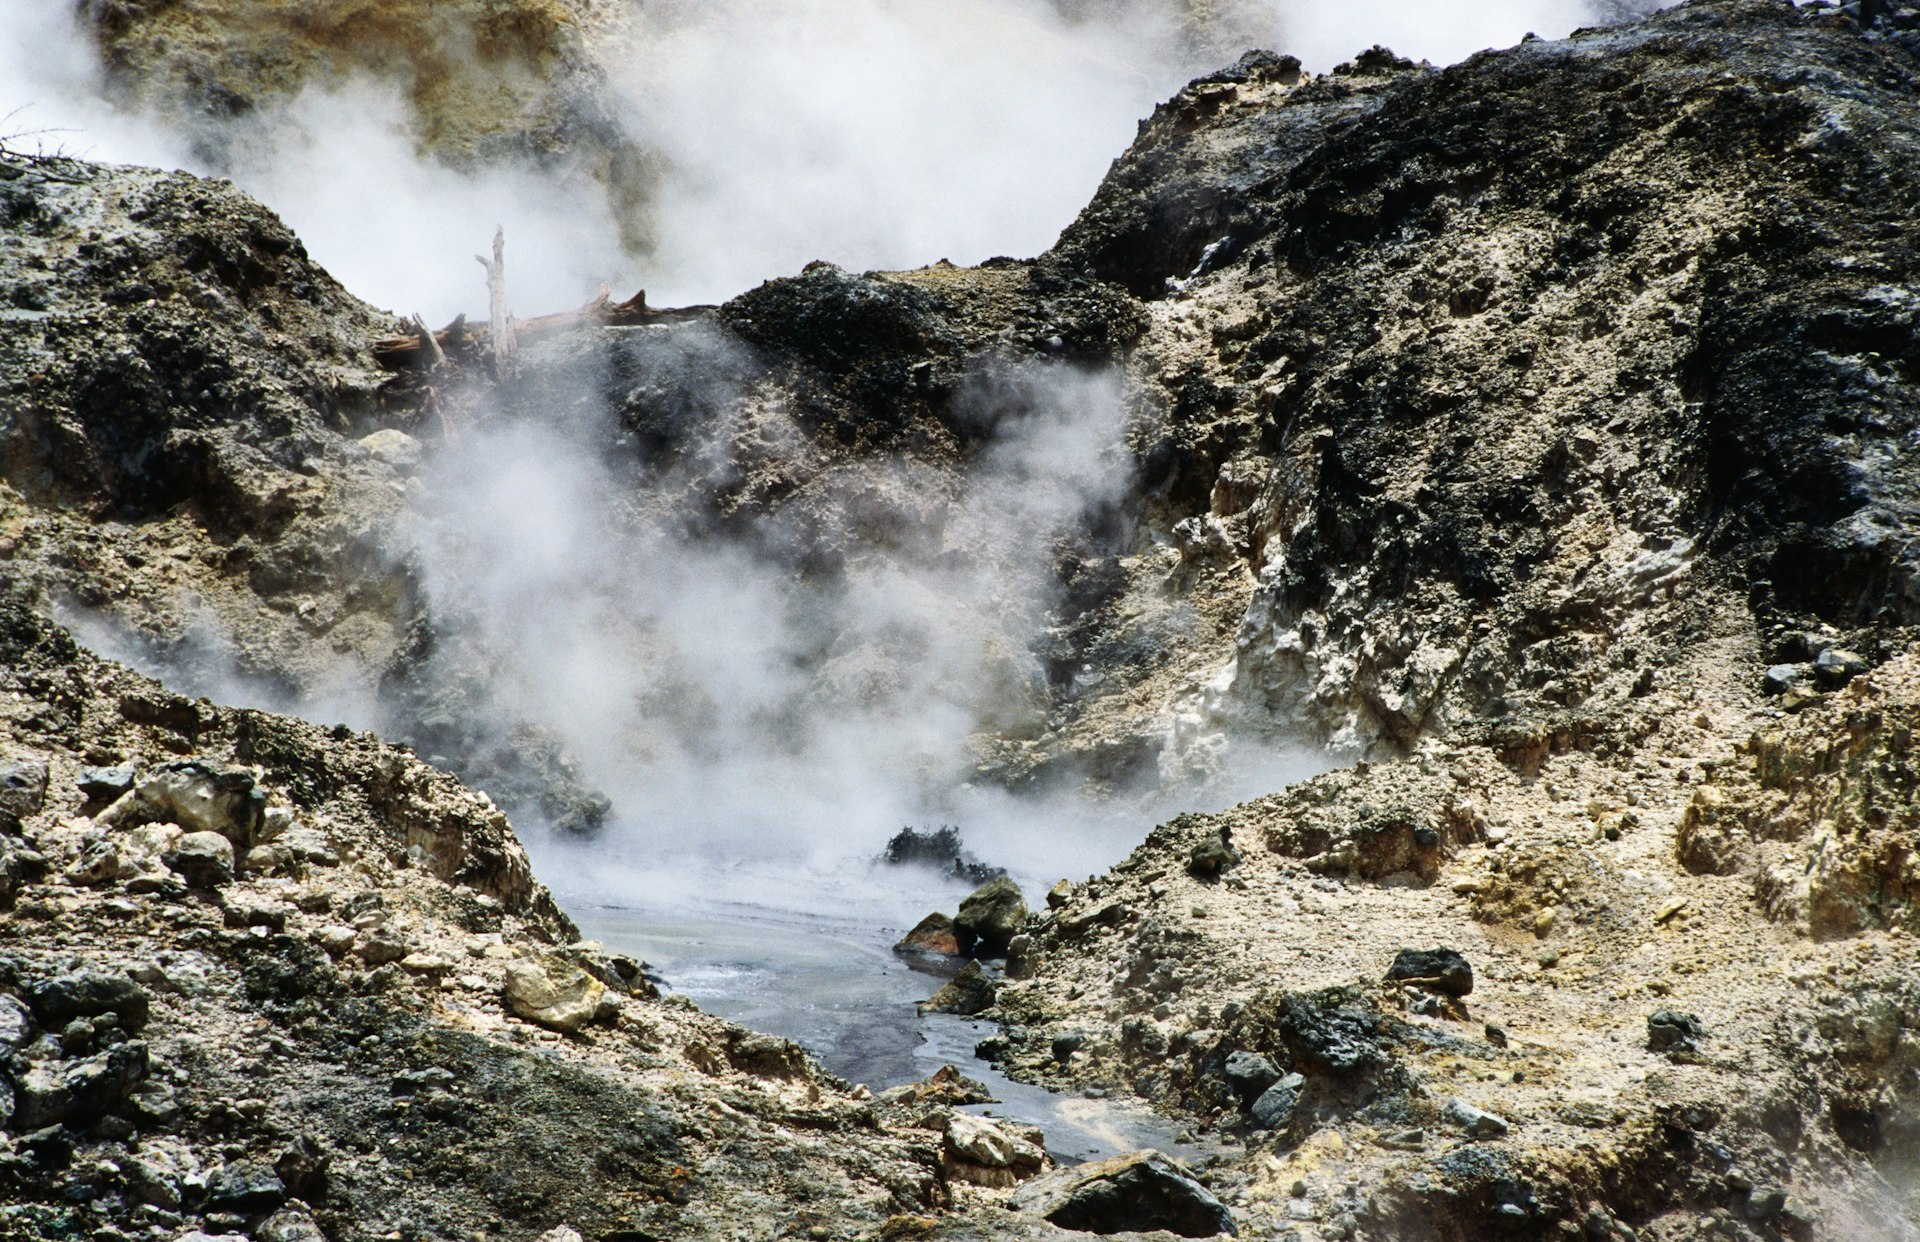 Steaming, otherwordly pools at St Lucia's Sulphur Springs